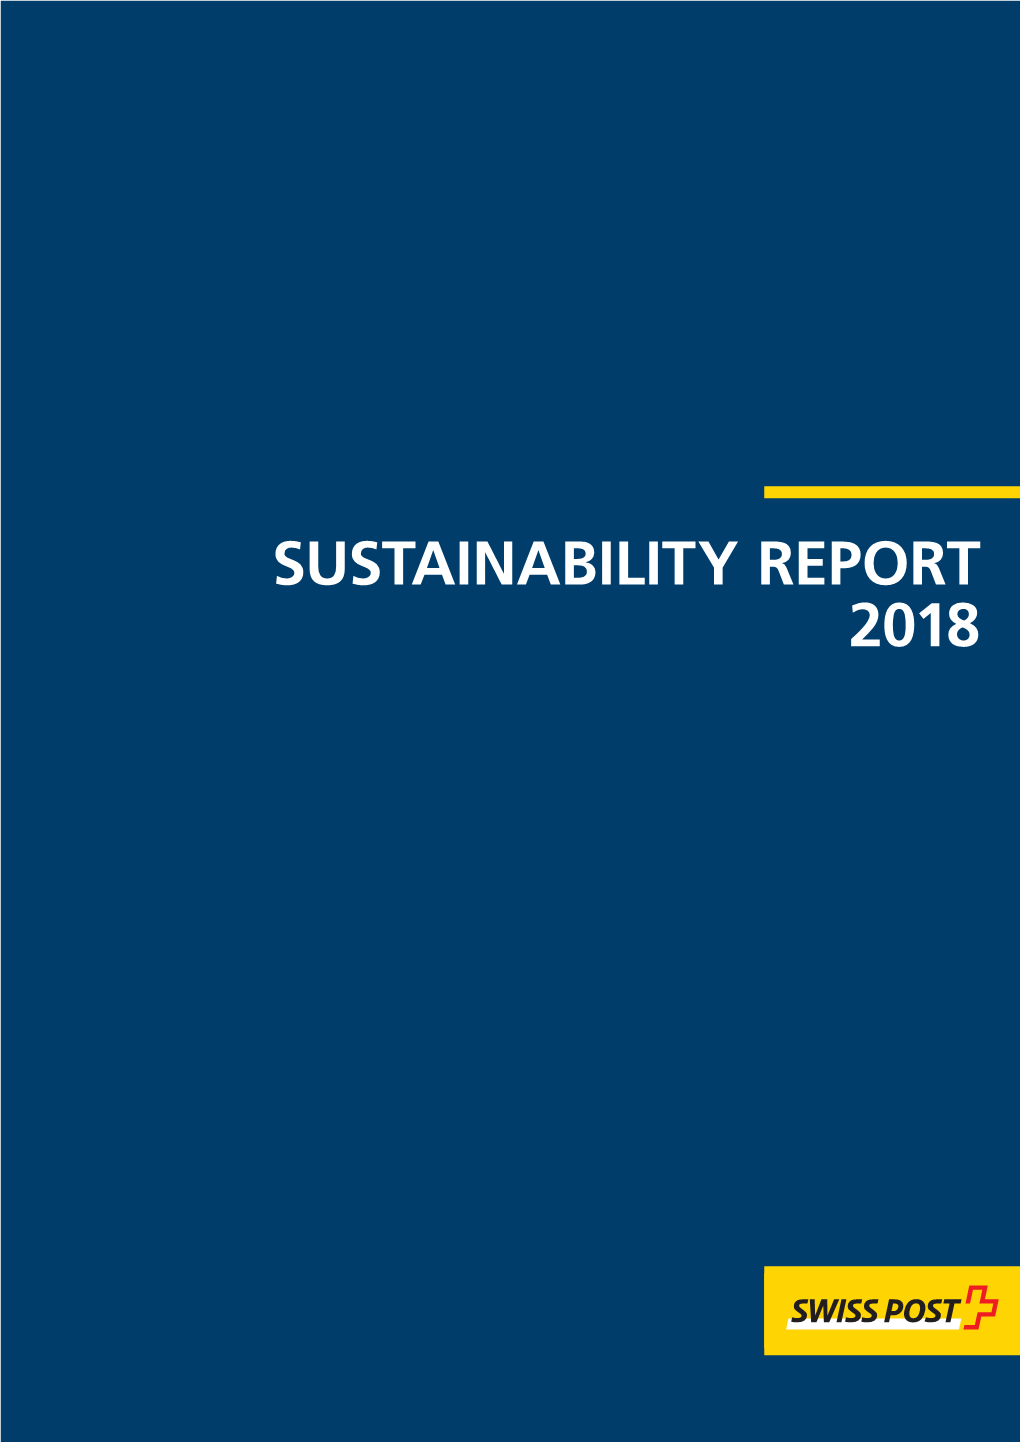 SUSTAINABILITY REPORT 2018 Swiss Post Sustainability Reporting for 2018